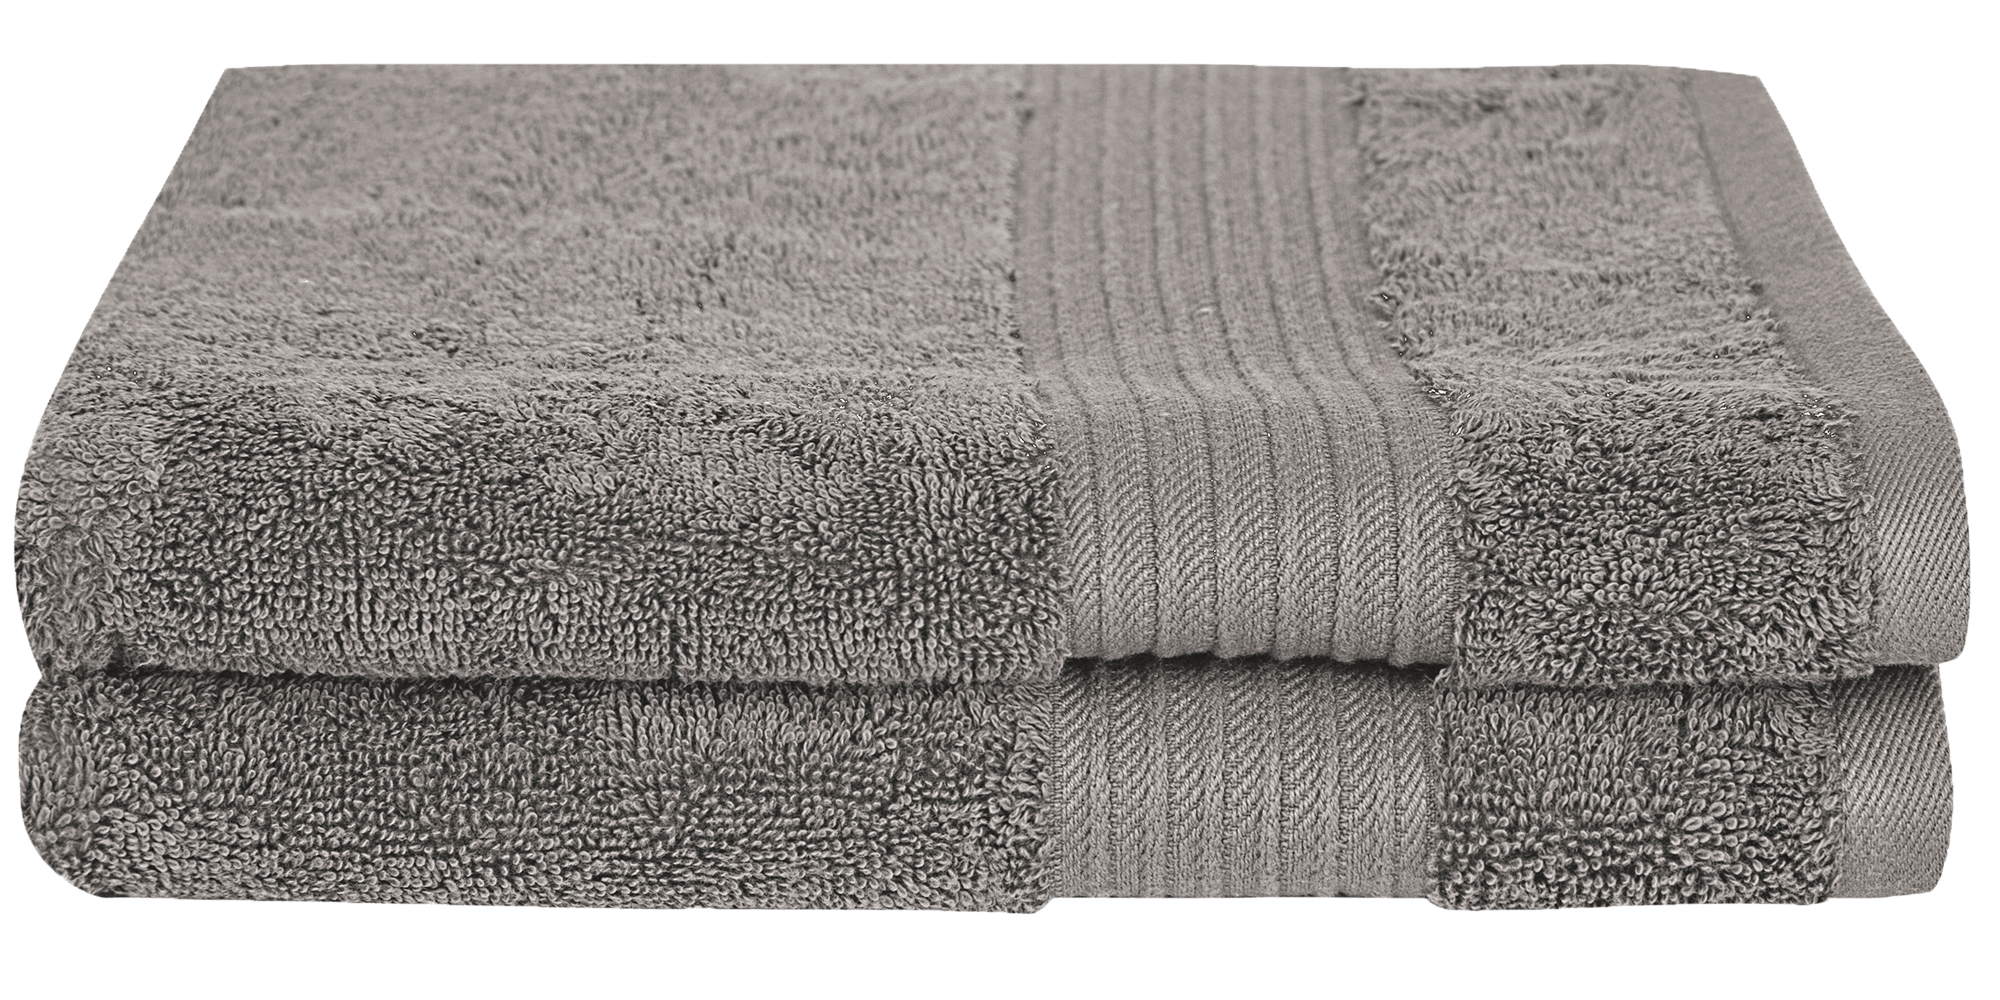 Buy Bliss Classic 650 GSM Bath Towel at Bumble Towels